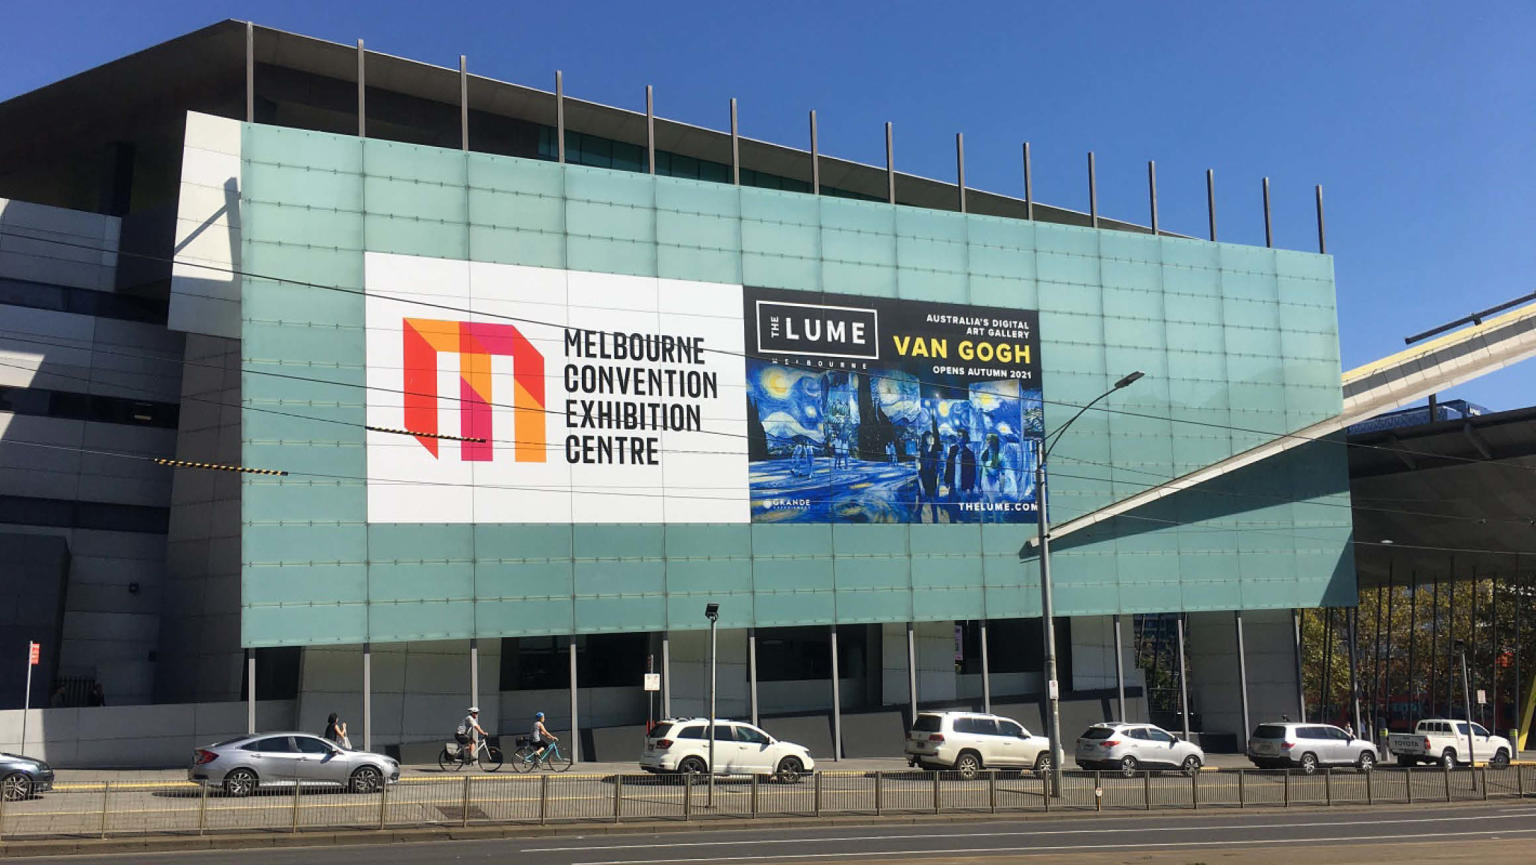 A spacious building with a prominent glass pane in front adorned with display stickers showcasing the names "Melbourne Convention Exhibition Centre" and "THE LUME Melbourne Van Gogh." Several cars are parked in front of the building, while the sky above shines in a clear, vibrant blue.